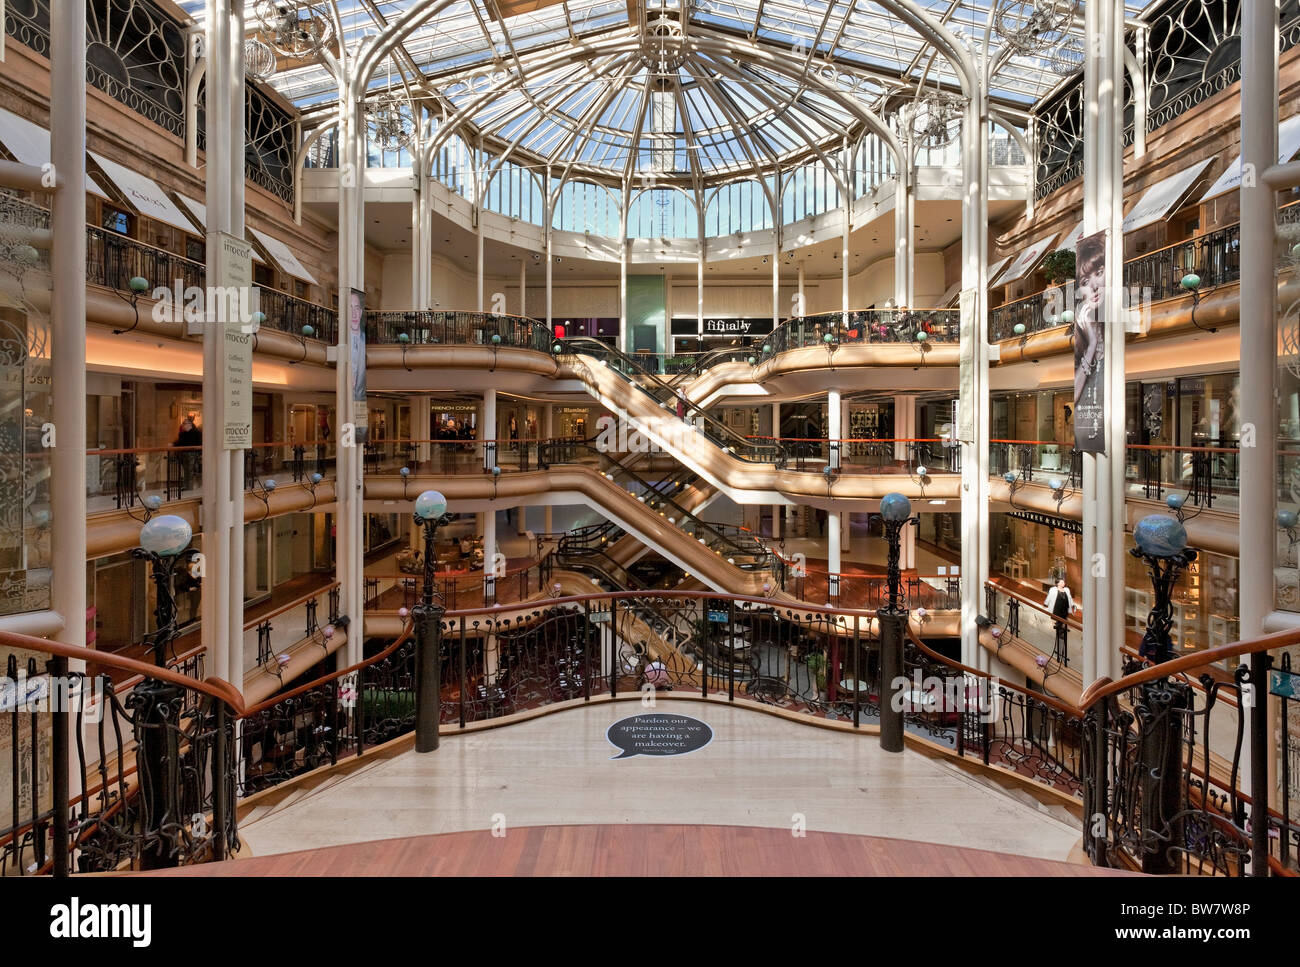 Princes Square, an art nouveau style shopping Mall in Glasgow Stock Photo